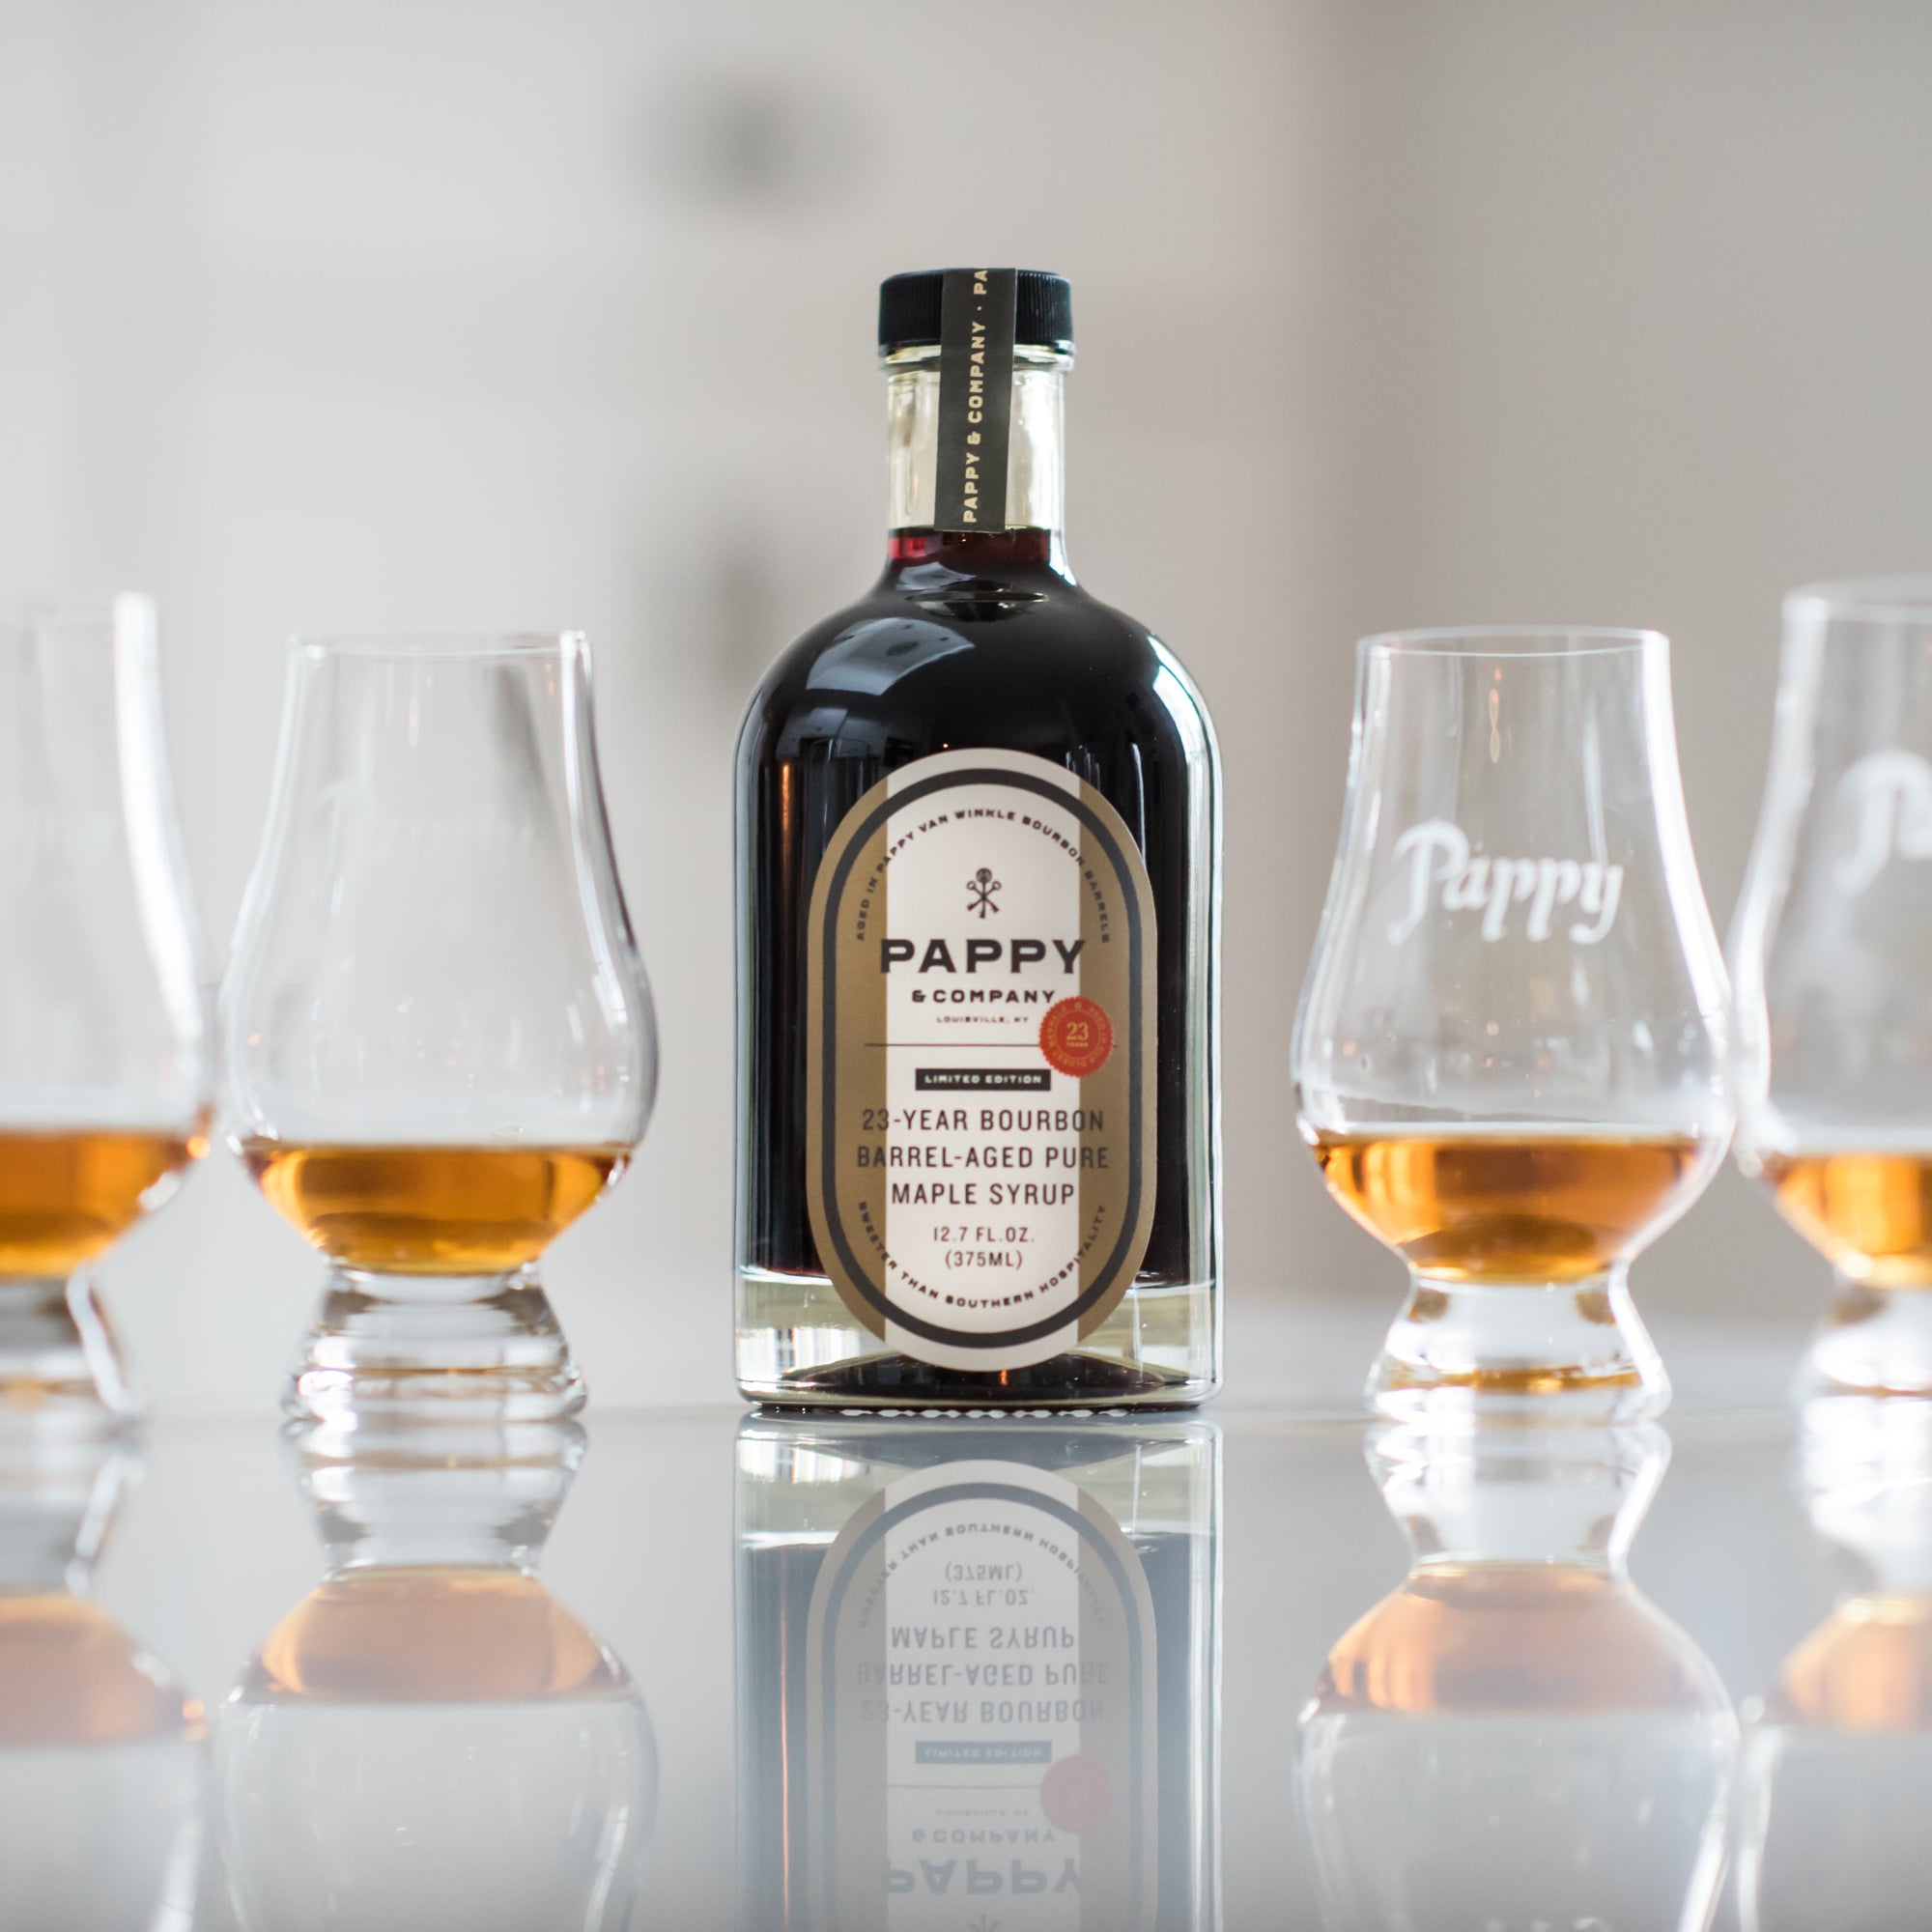 What Makes Our Pappy Van Winkle Maple Syrup So Darn Special?